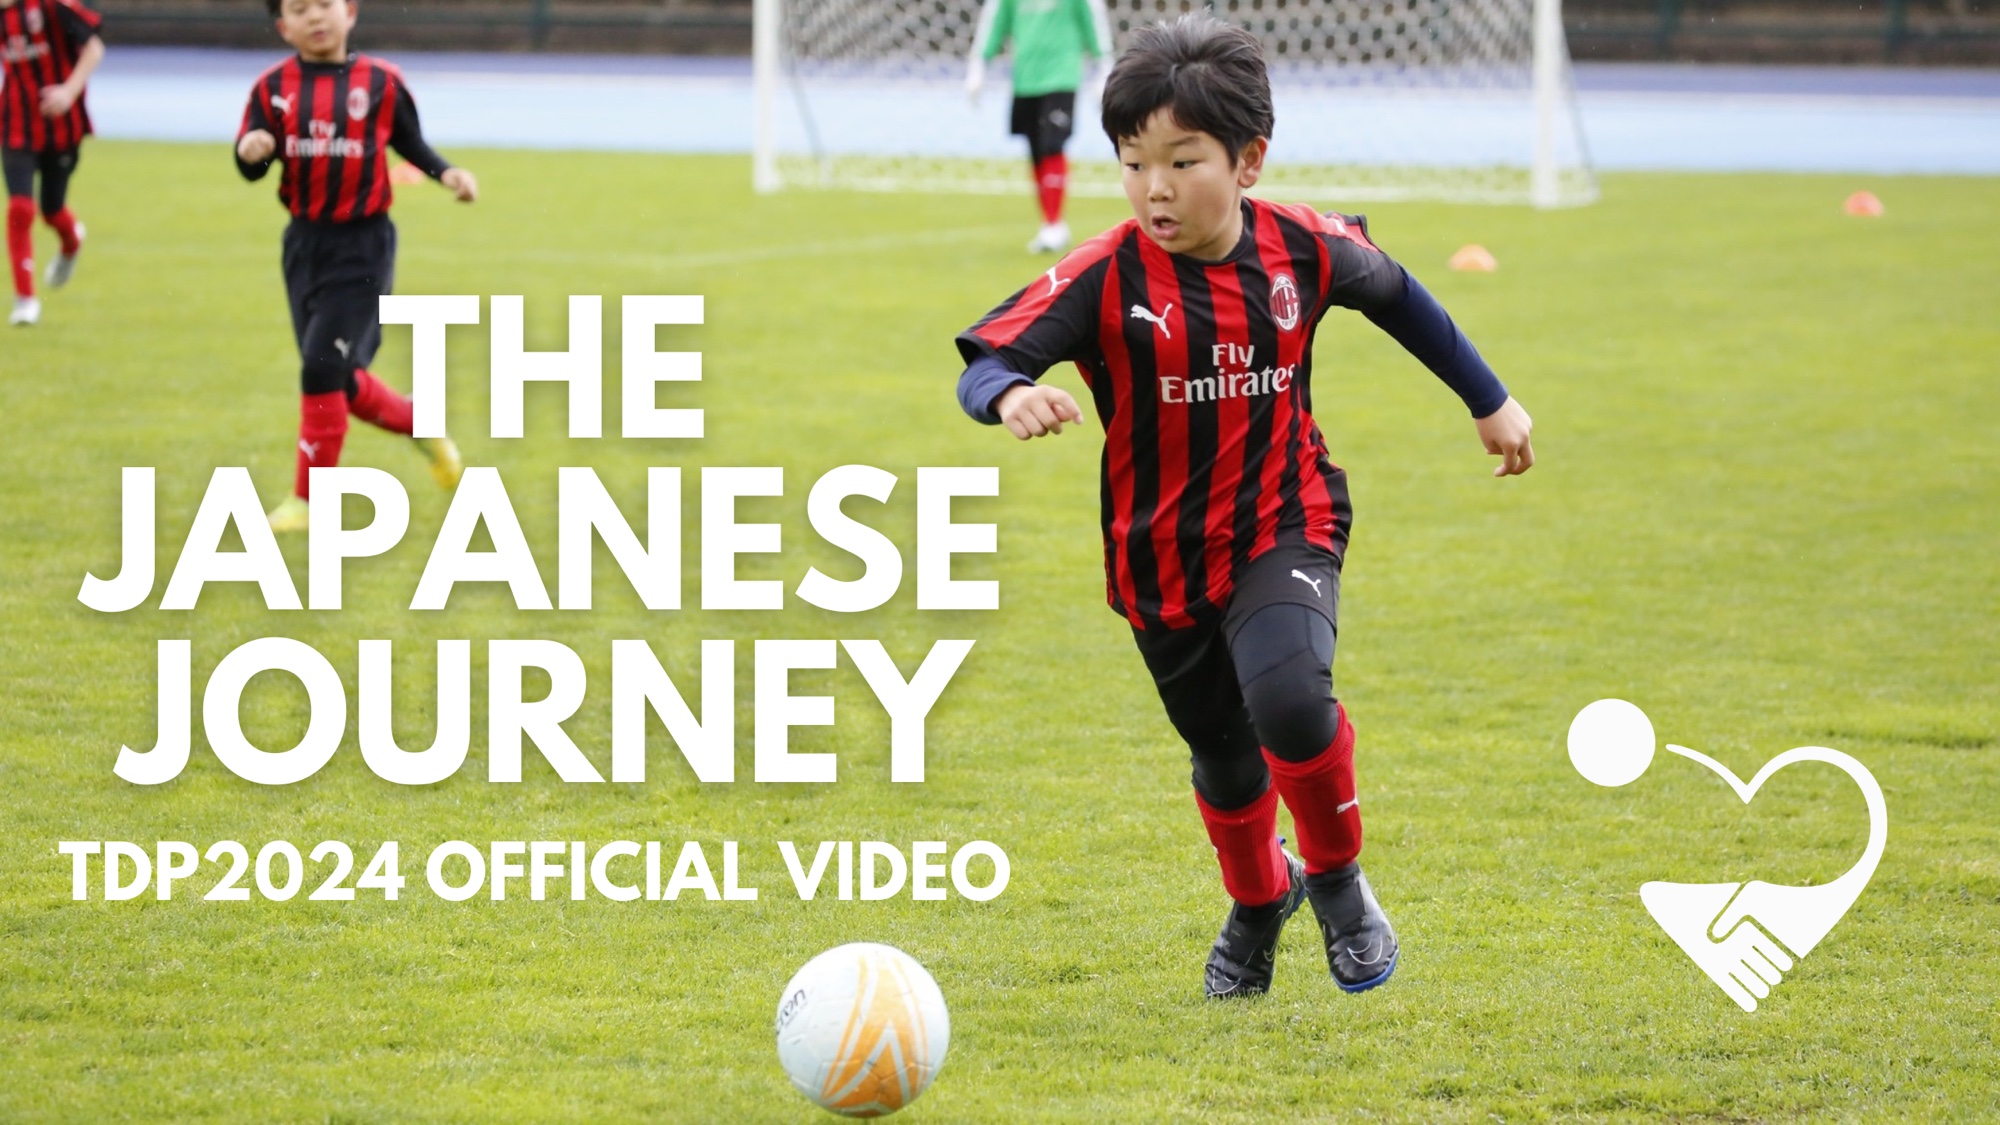 The Japanese Journey – TDP2024 Official Video